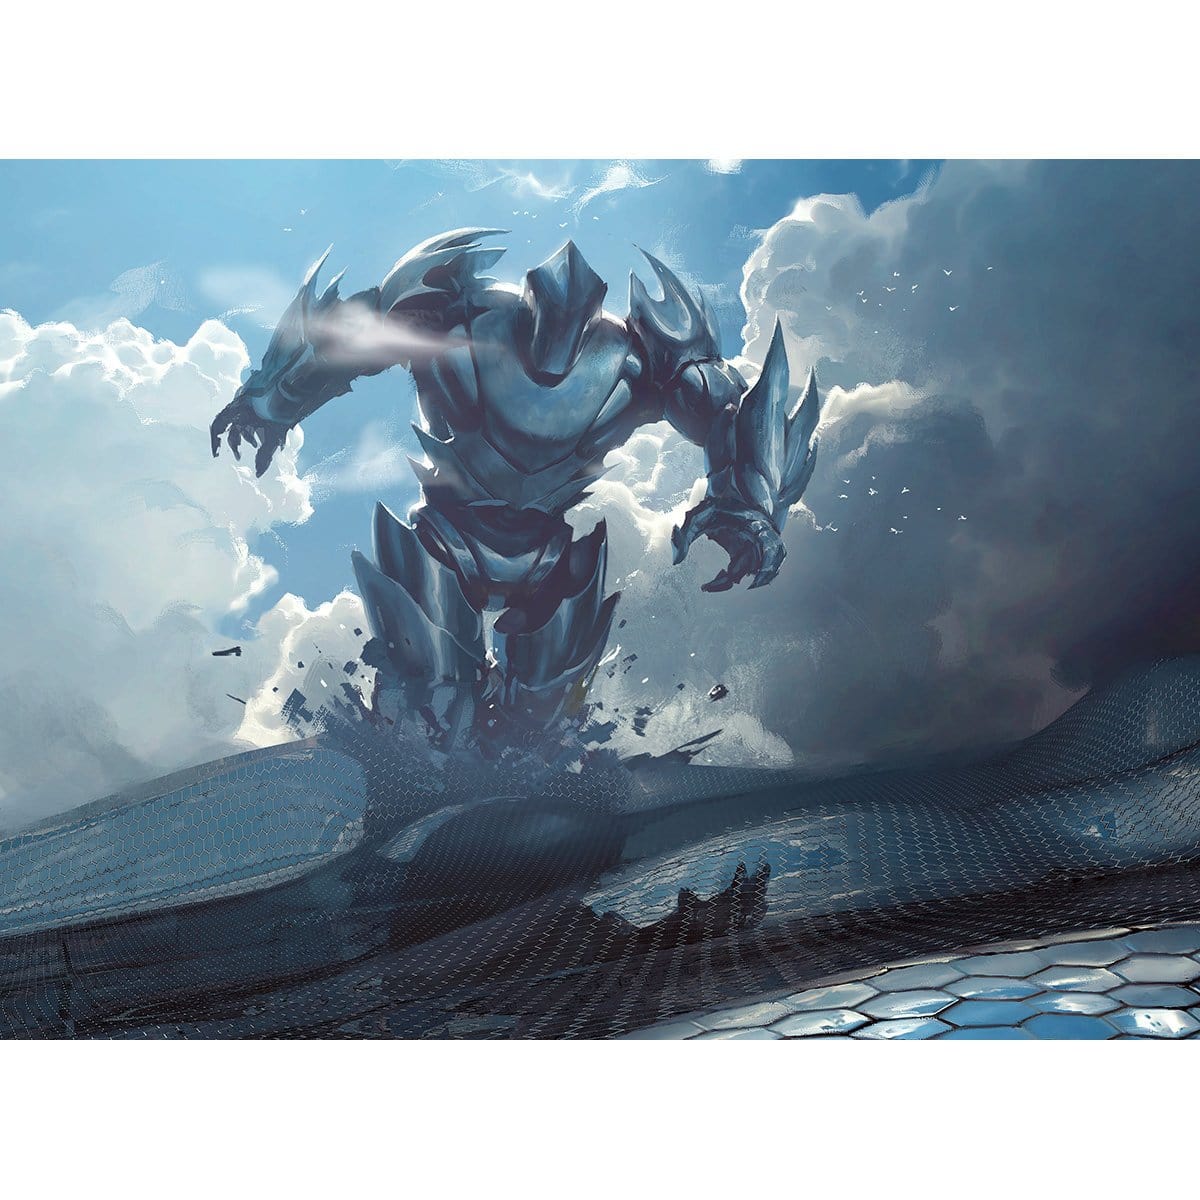 Sundering Titan Print - Print - Original Magic Art - Accessories for Magic the Gathering and other card games